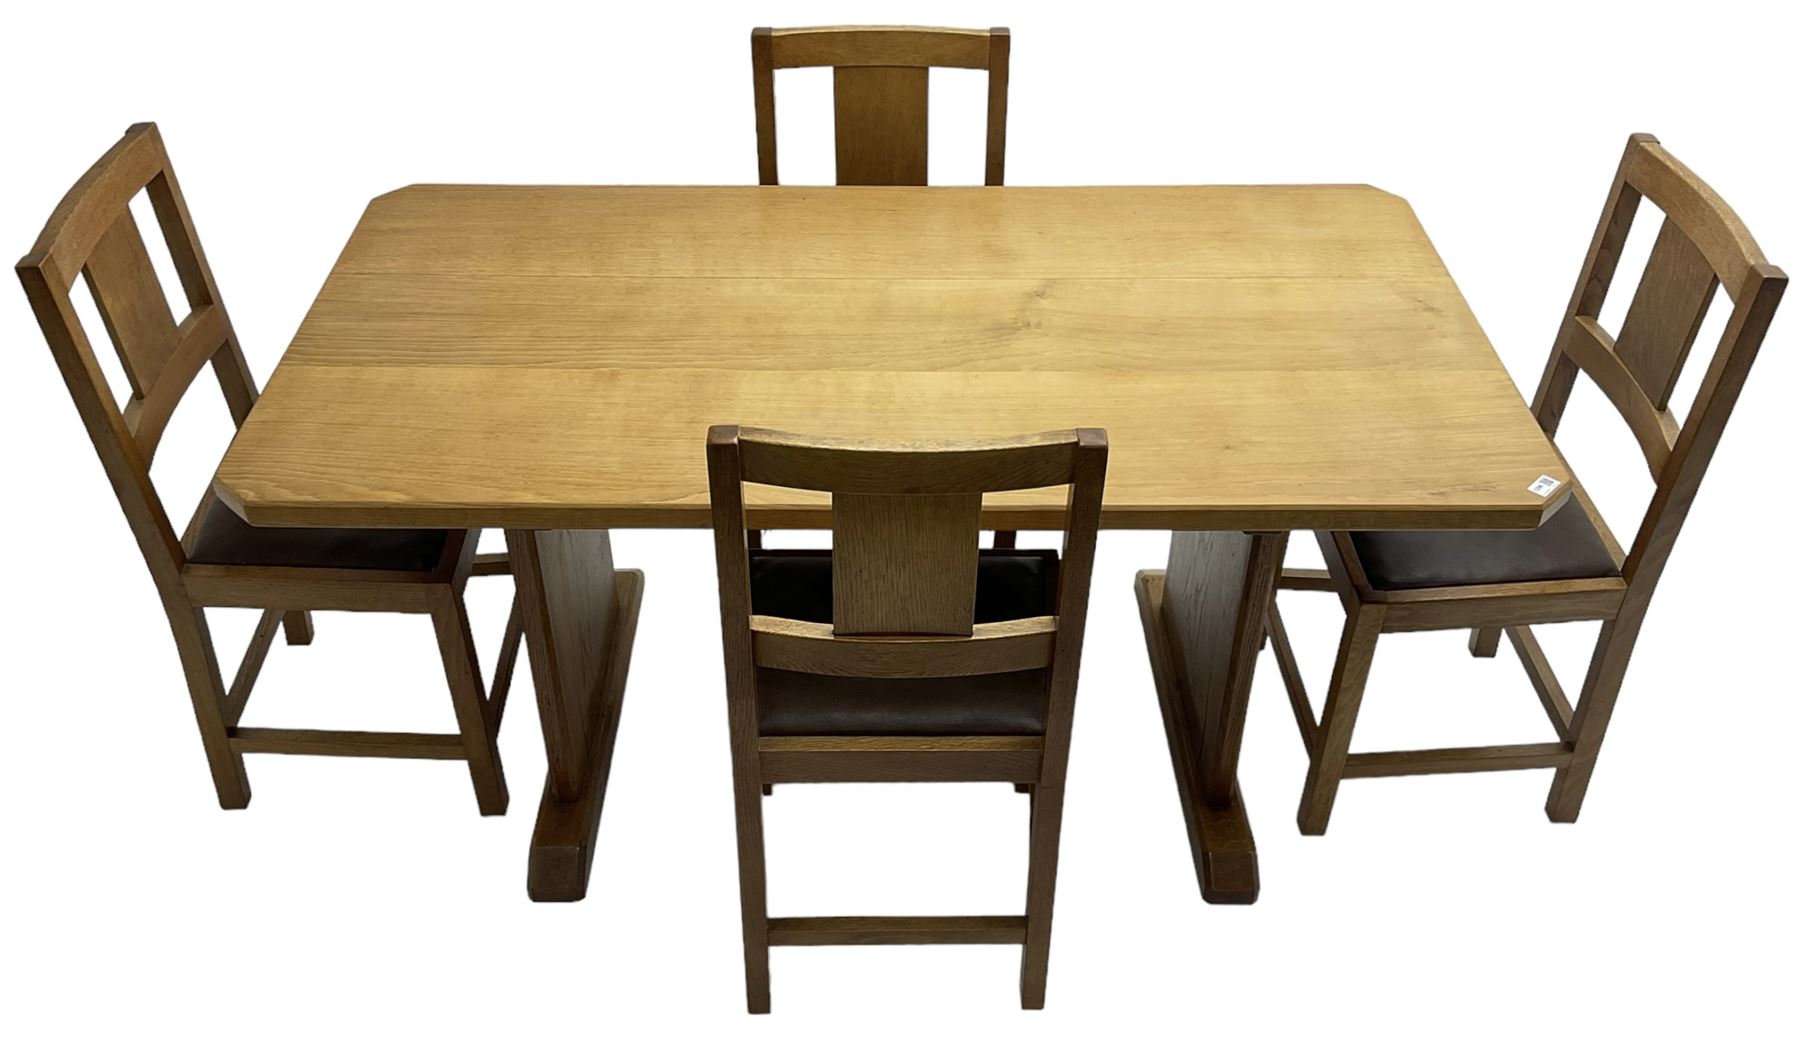 Light oak dining table - Image 2 of 7